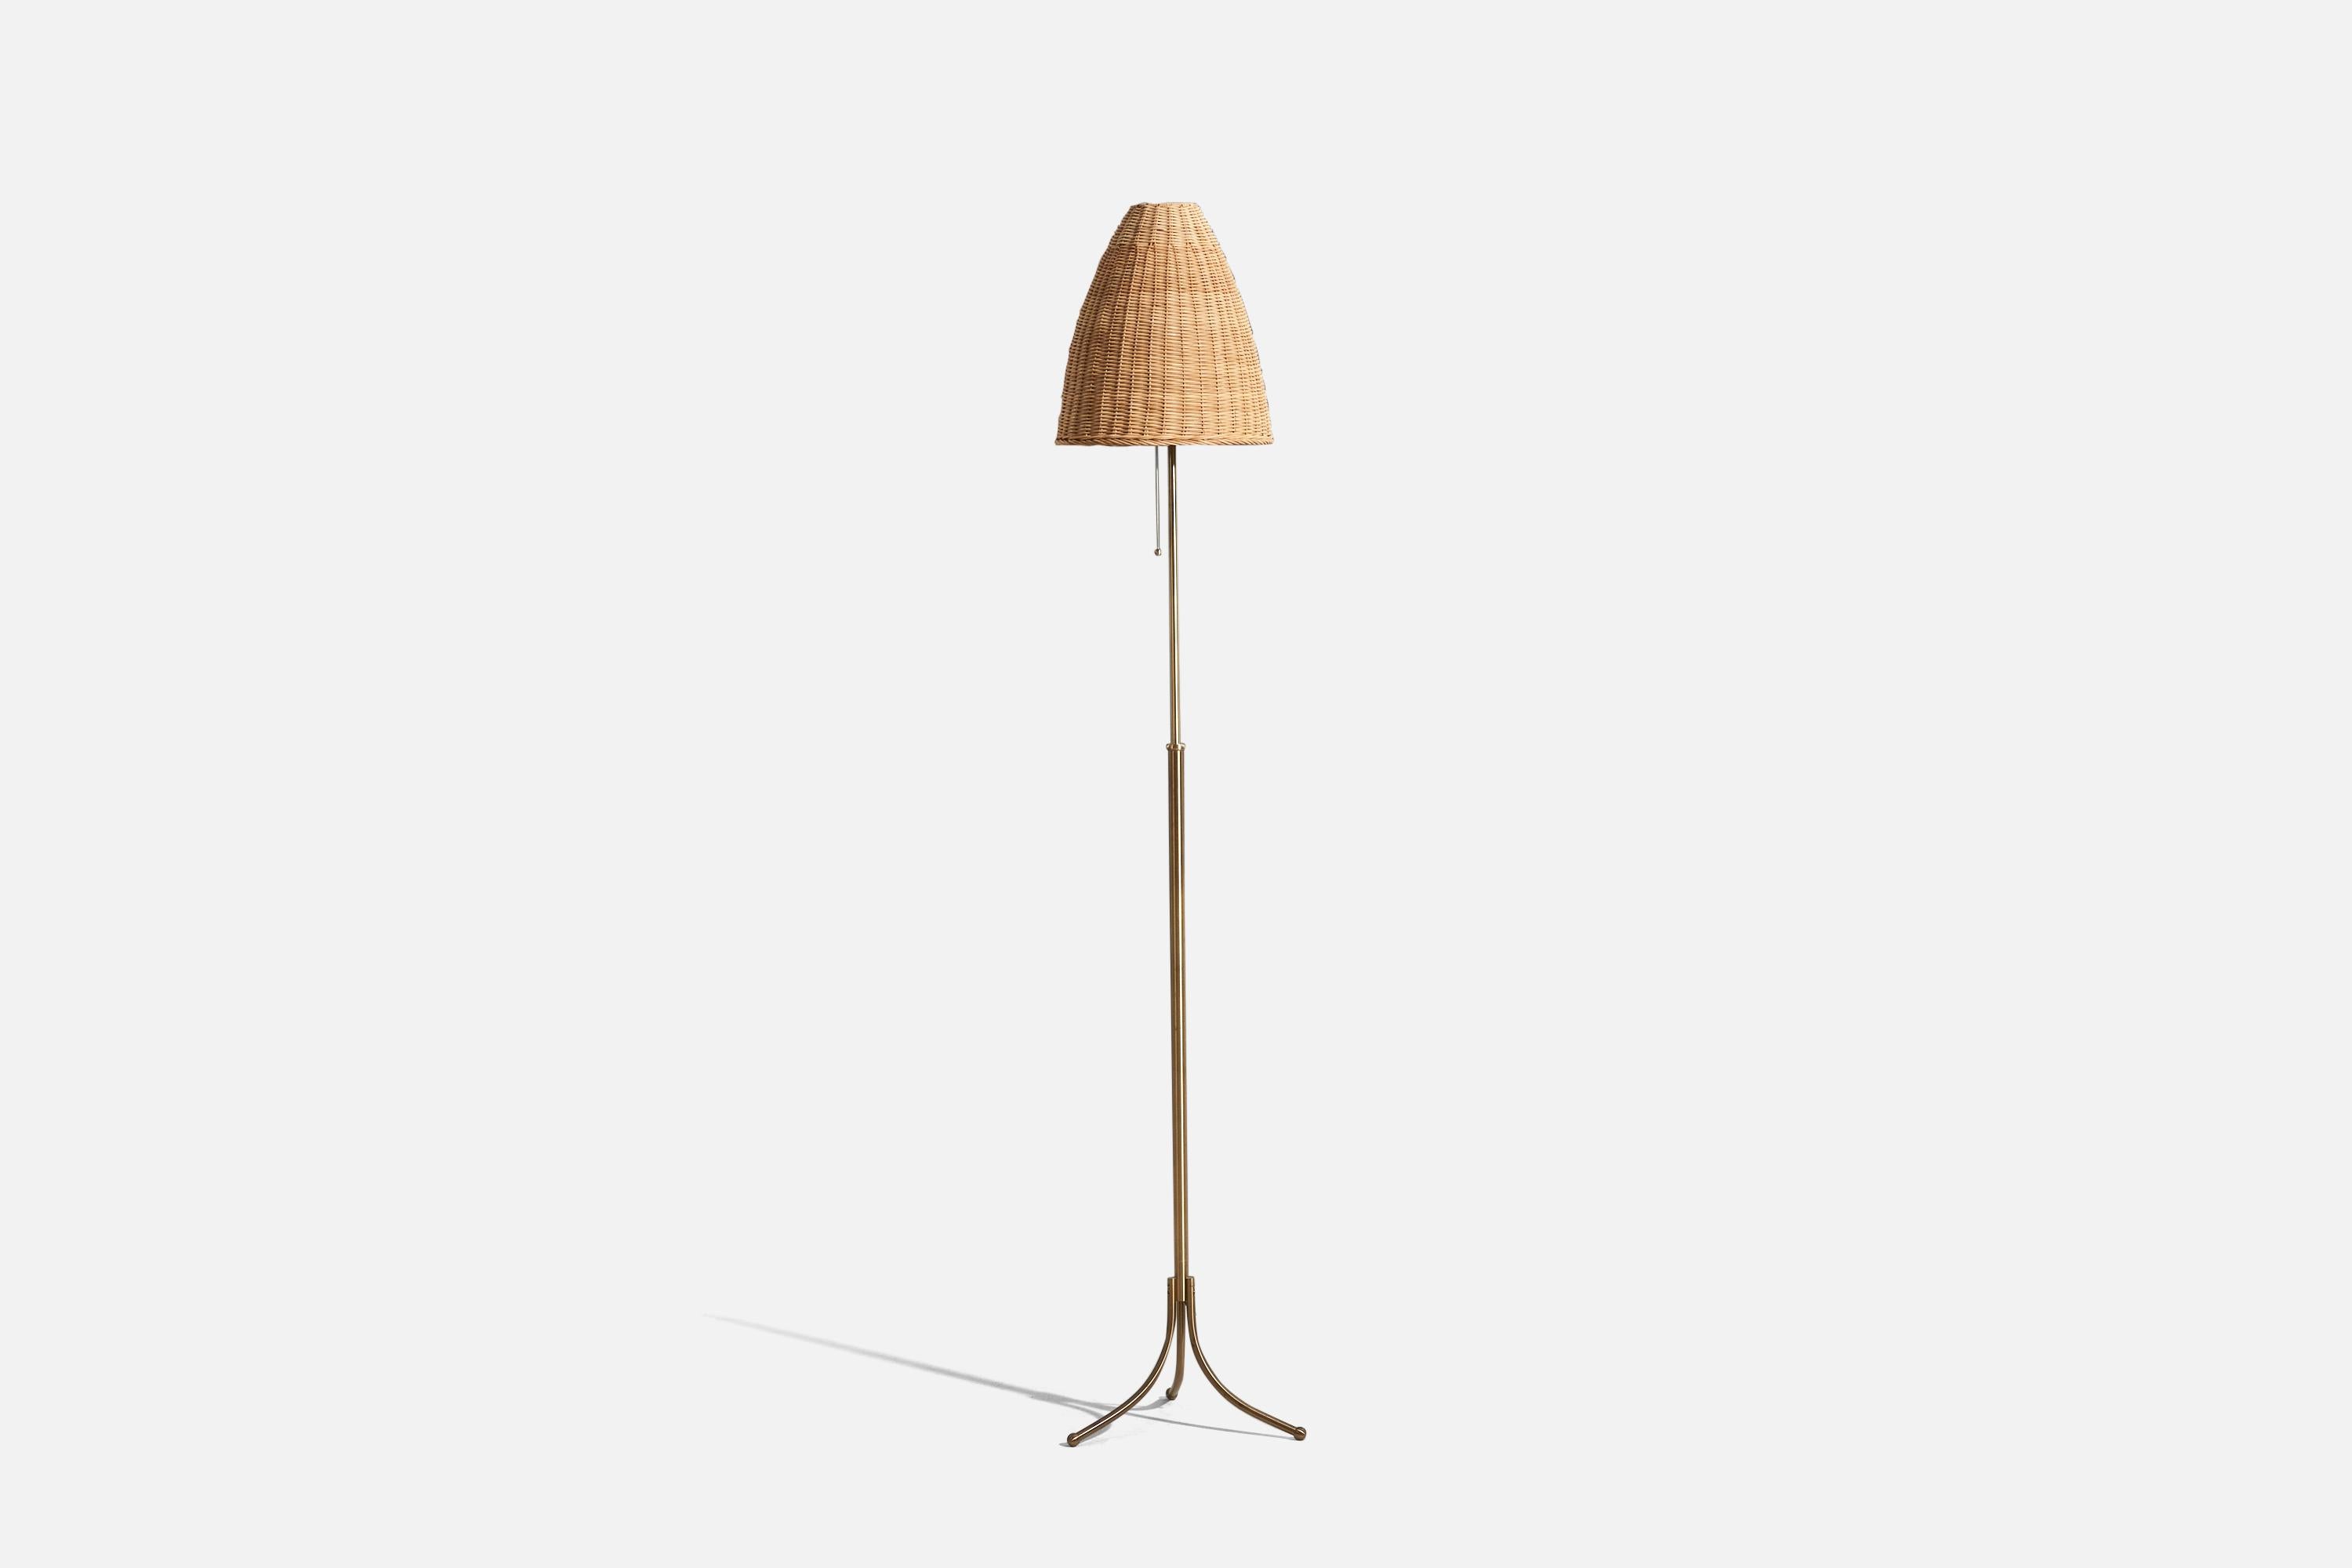 A brass and rattan floor lamp designed by Josef Frank and produced by Svenskt Tenn, Sweden, 1950s.